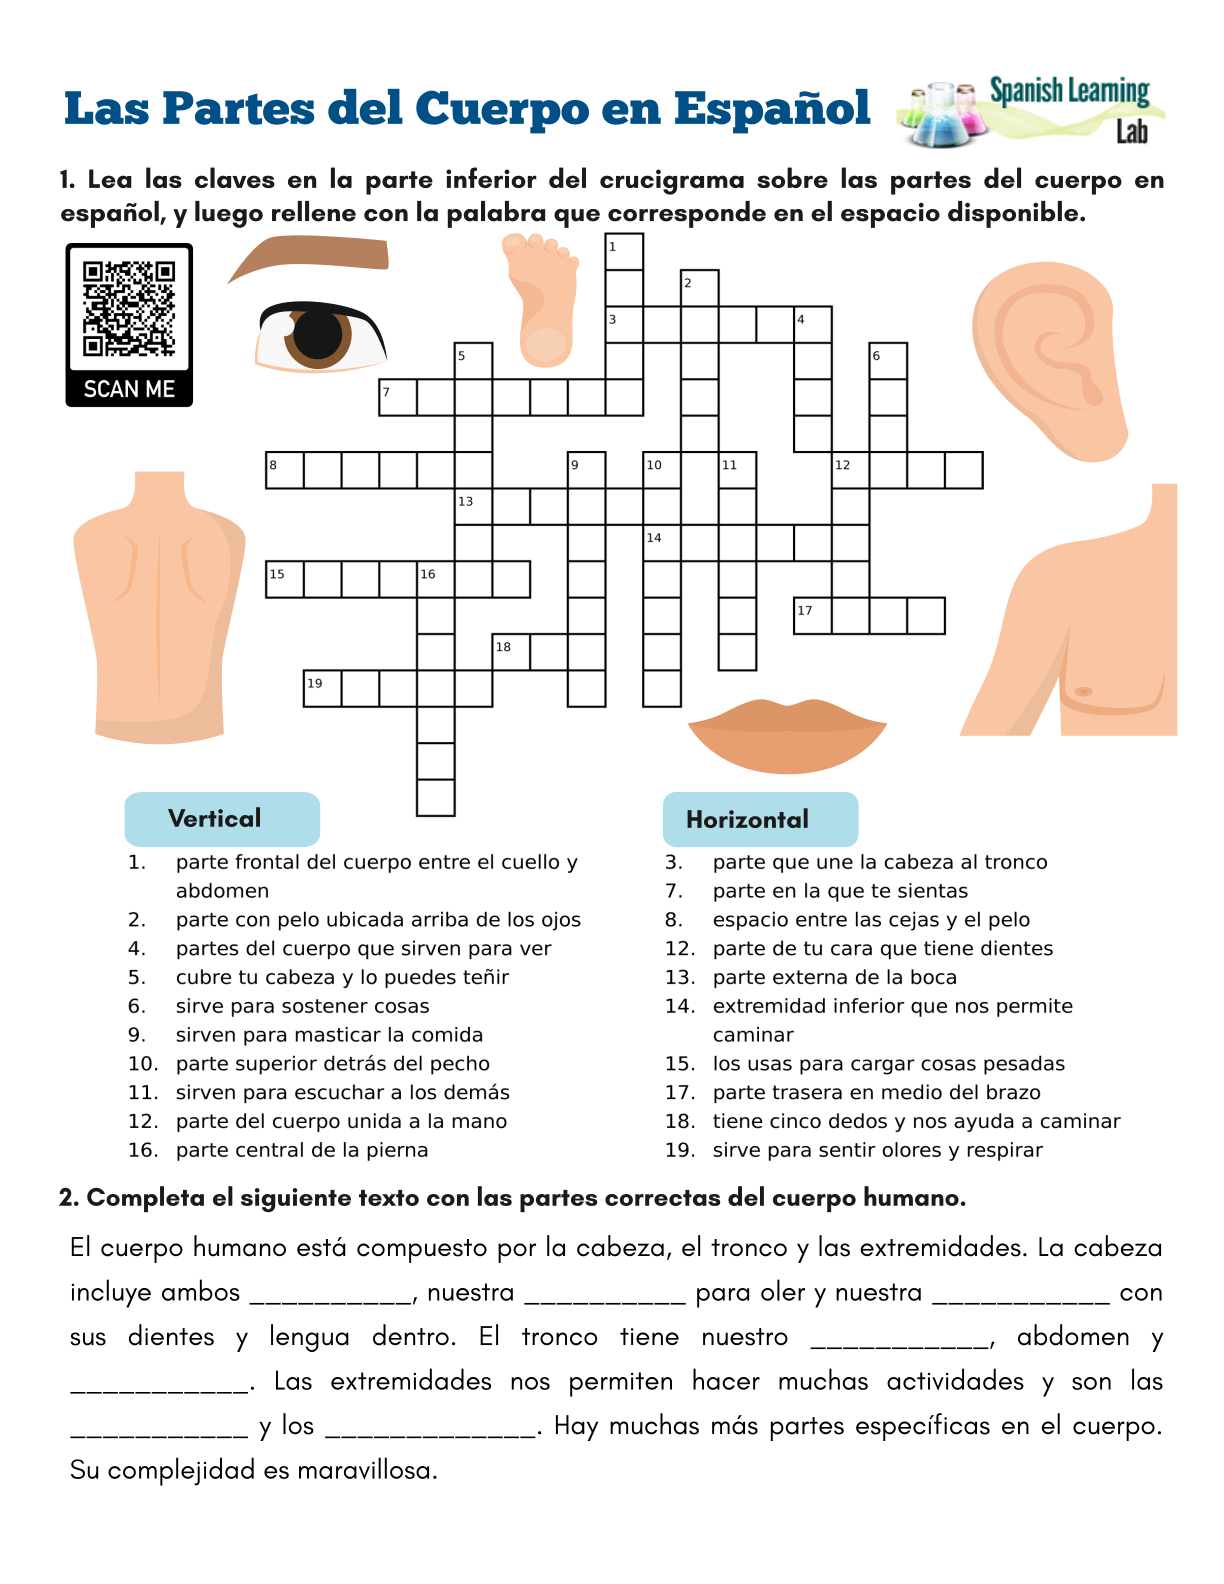 Parts of the Body in Spanish - PDF Crossword Puzzle In Spanish Body Parts Worksheet